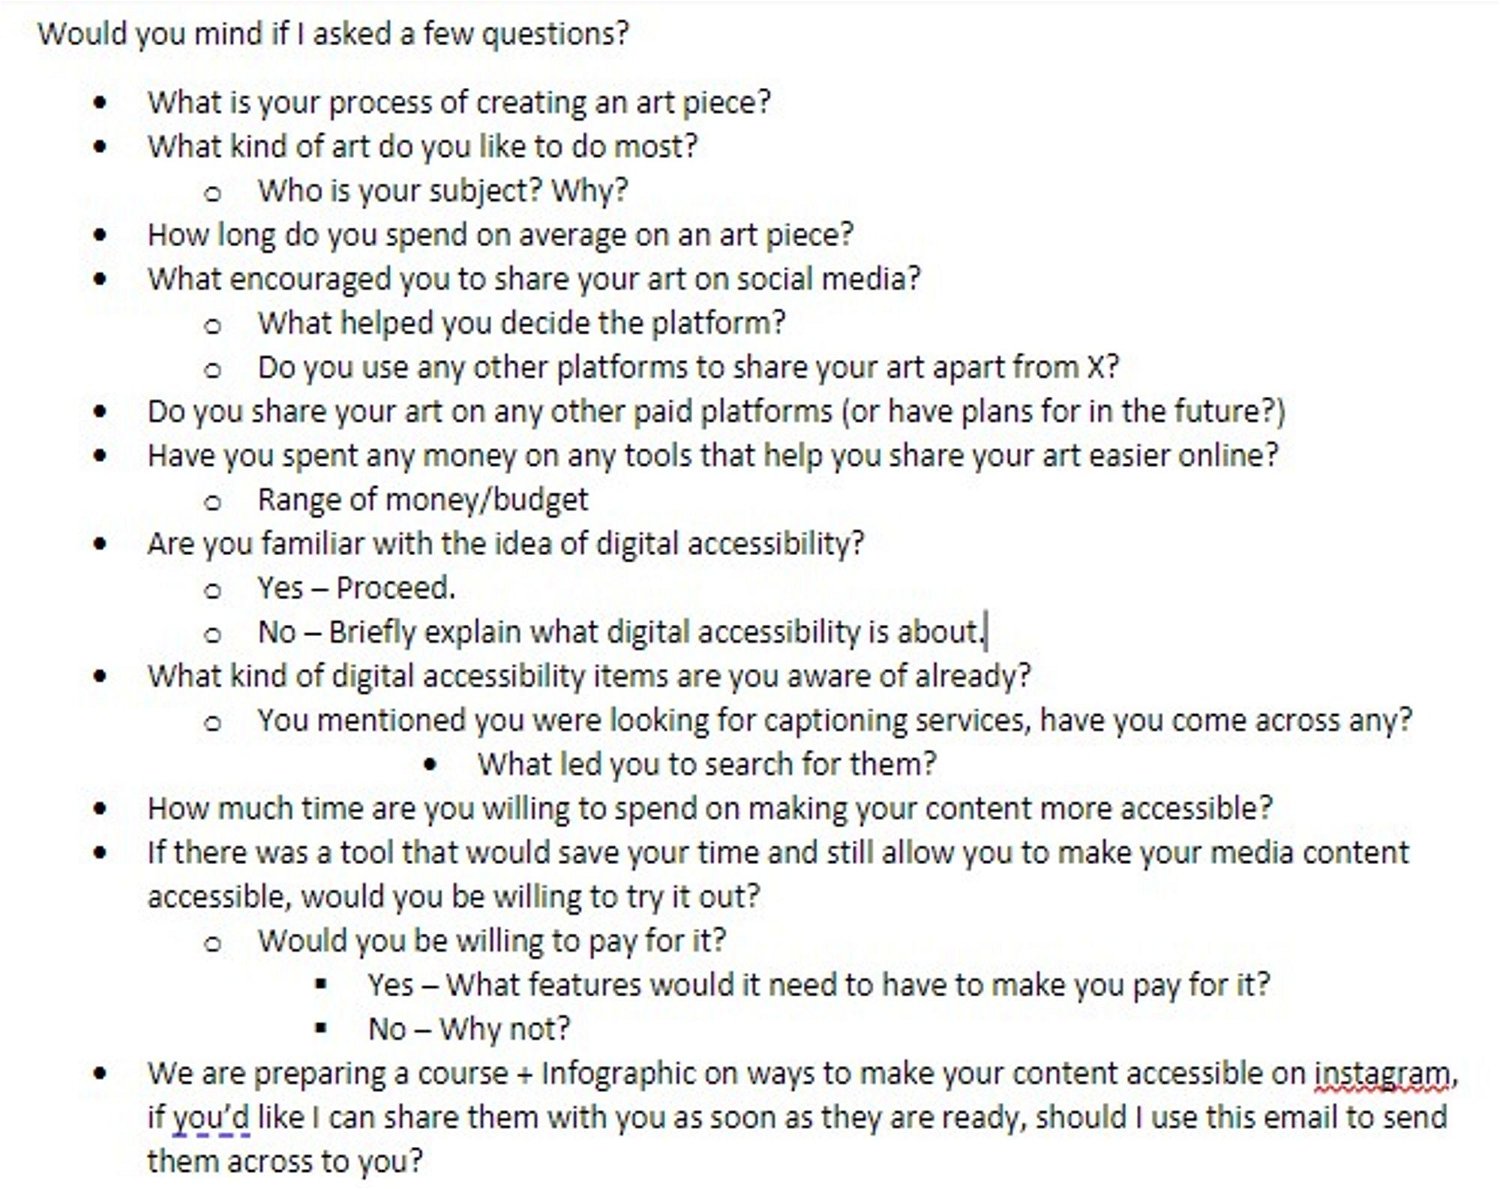 Sample questions for an artist interview participant